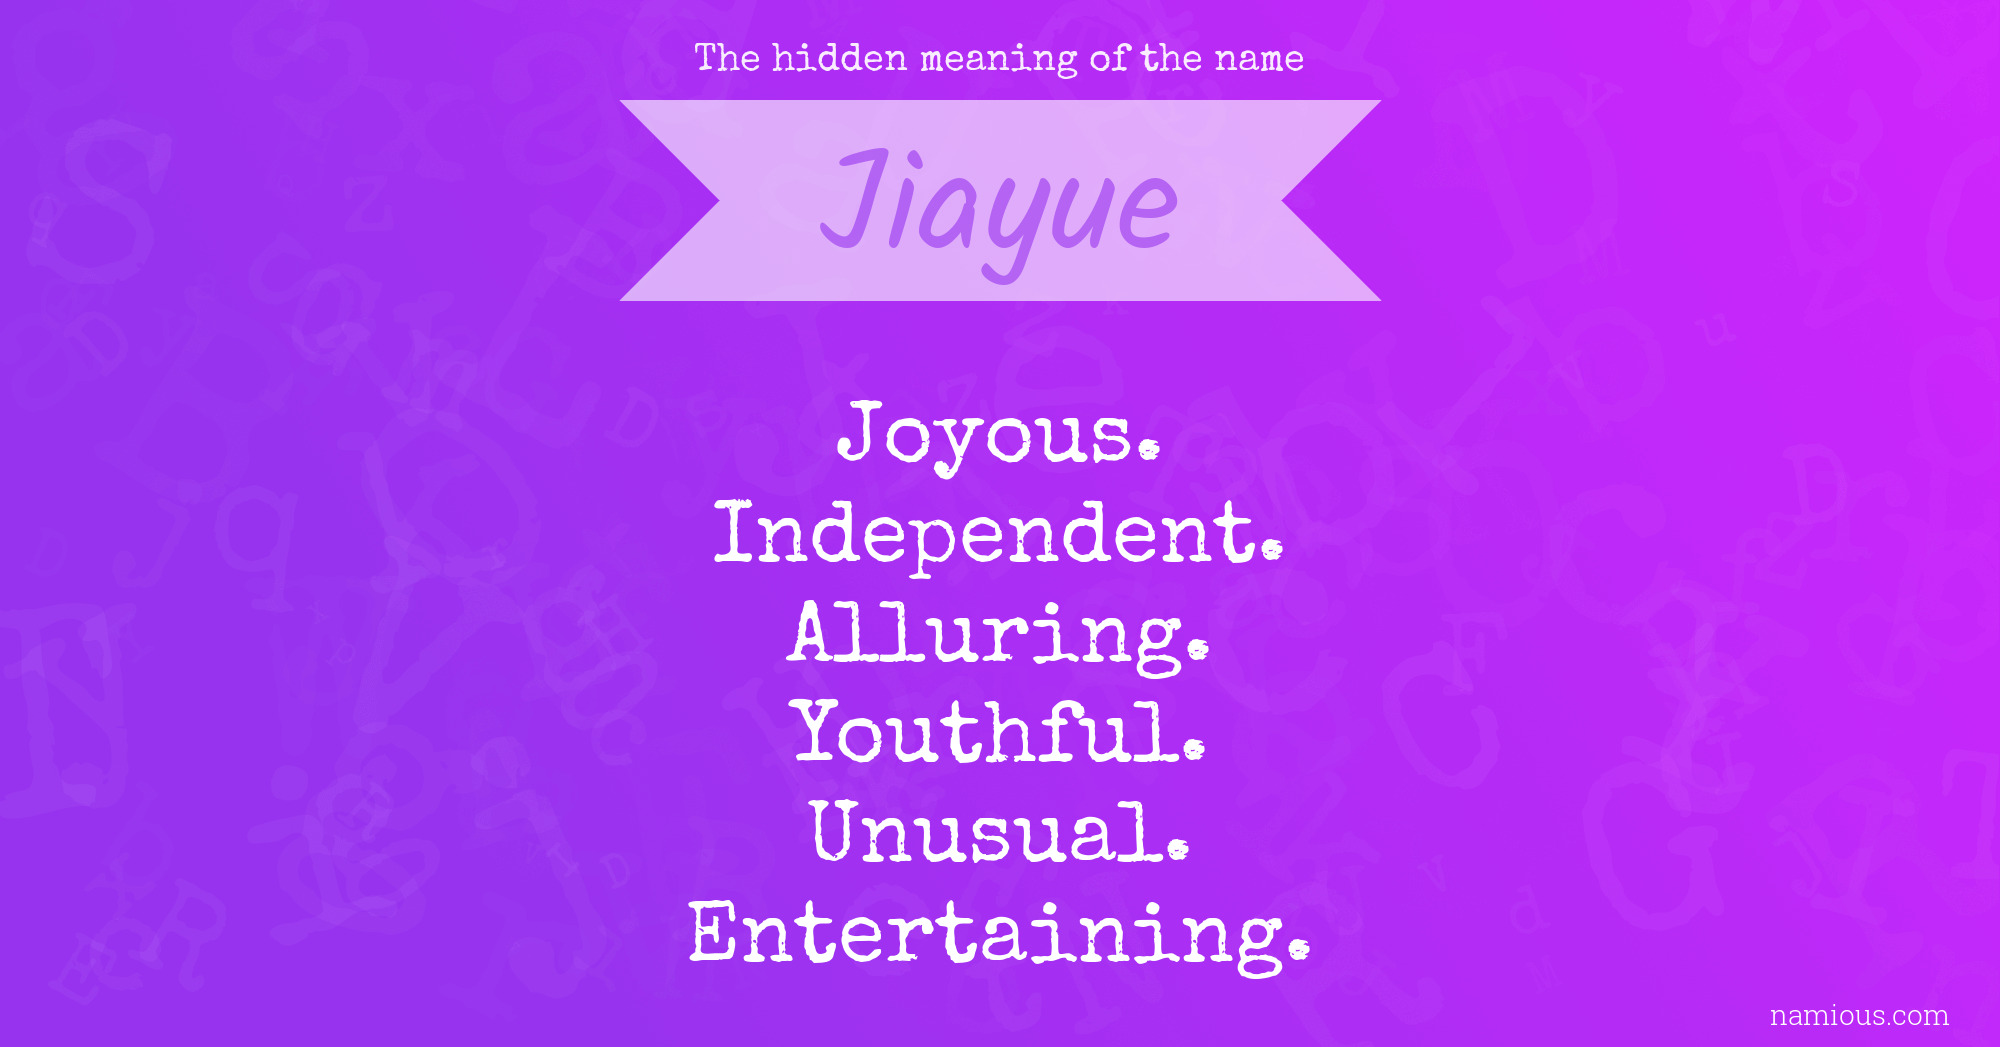 The hidden meaning of the name Jiayue